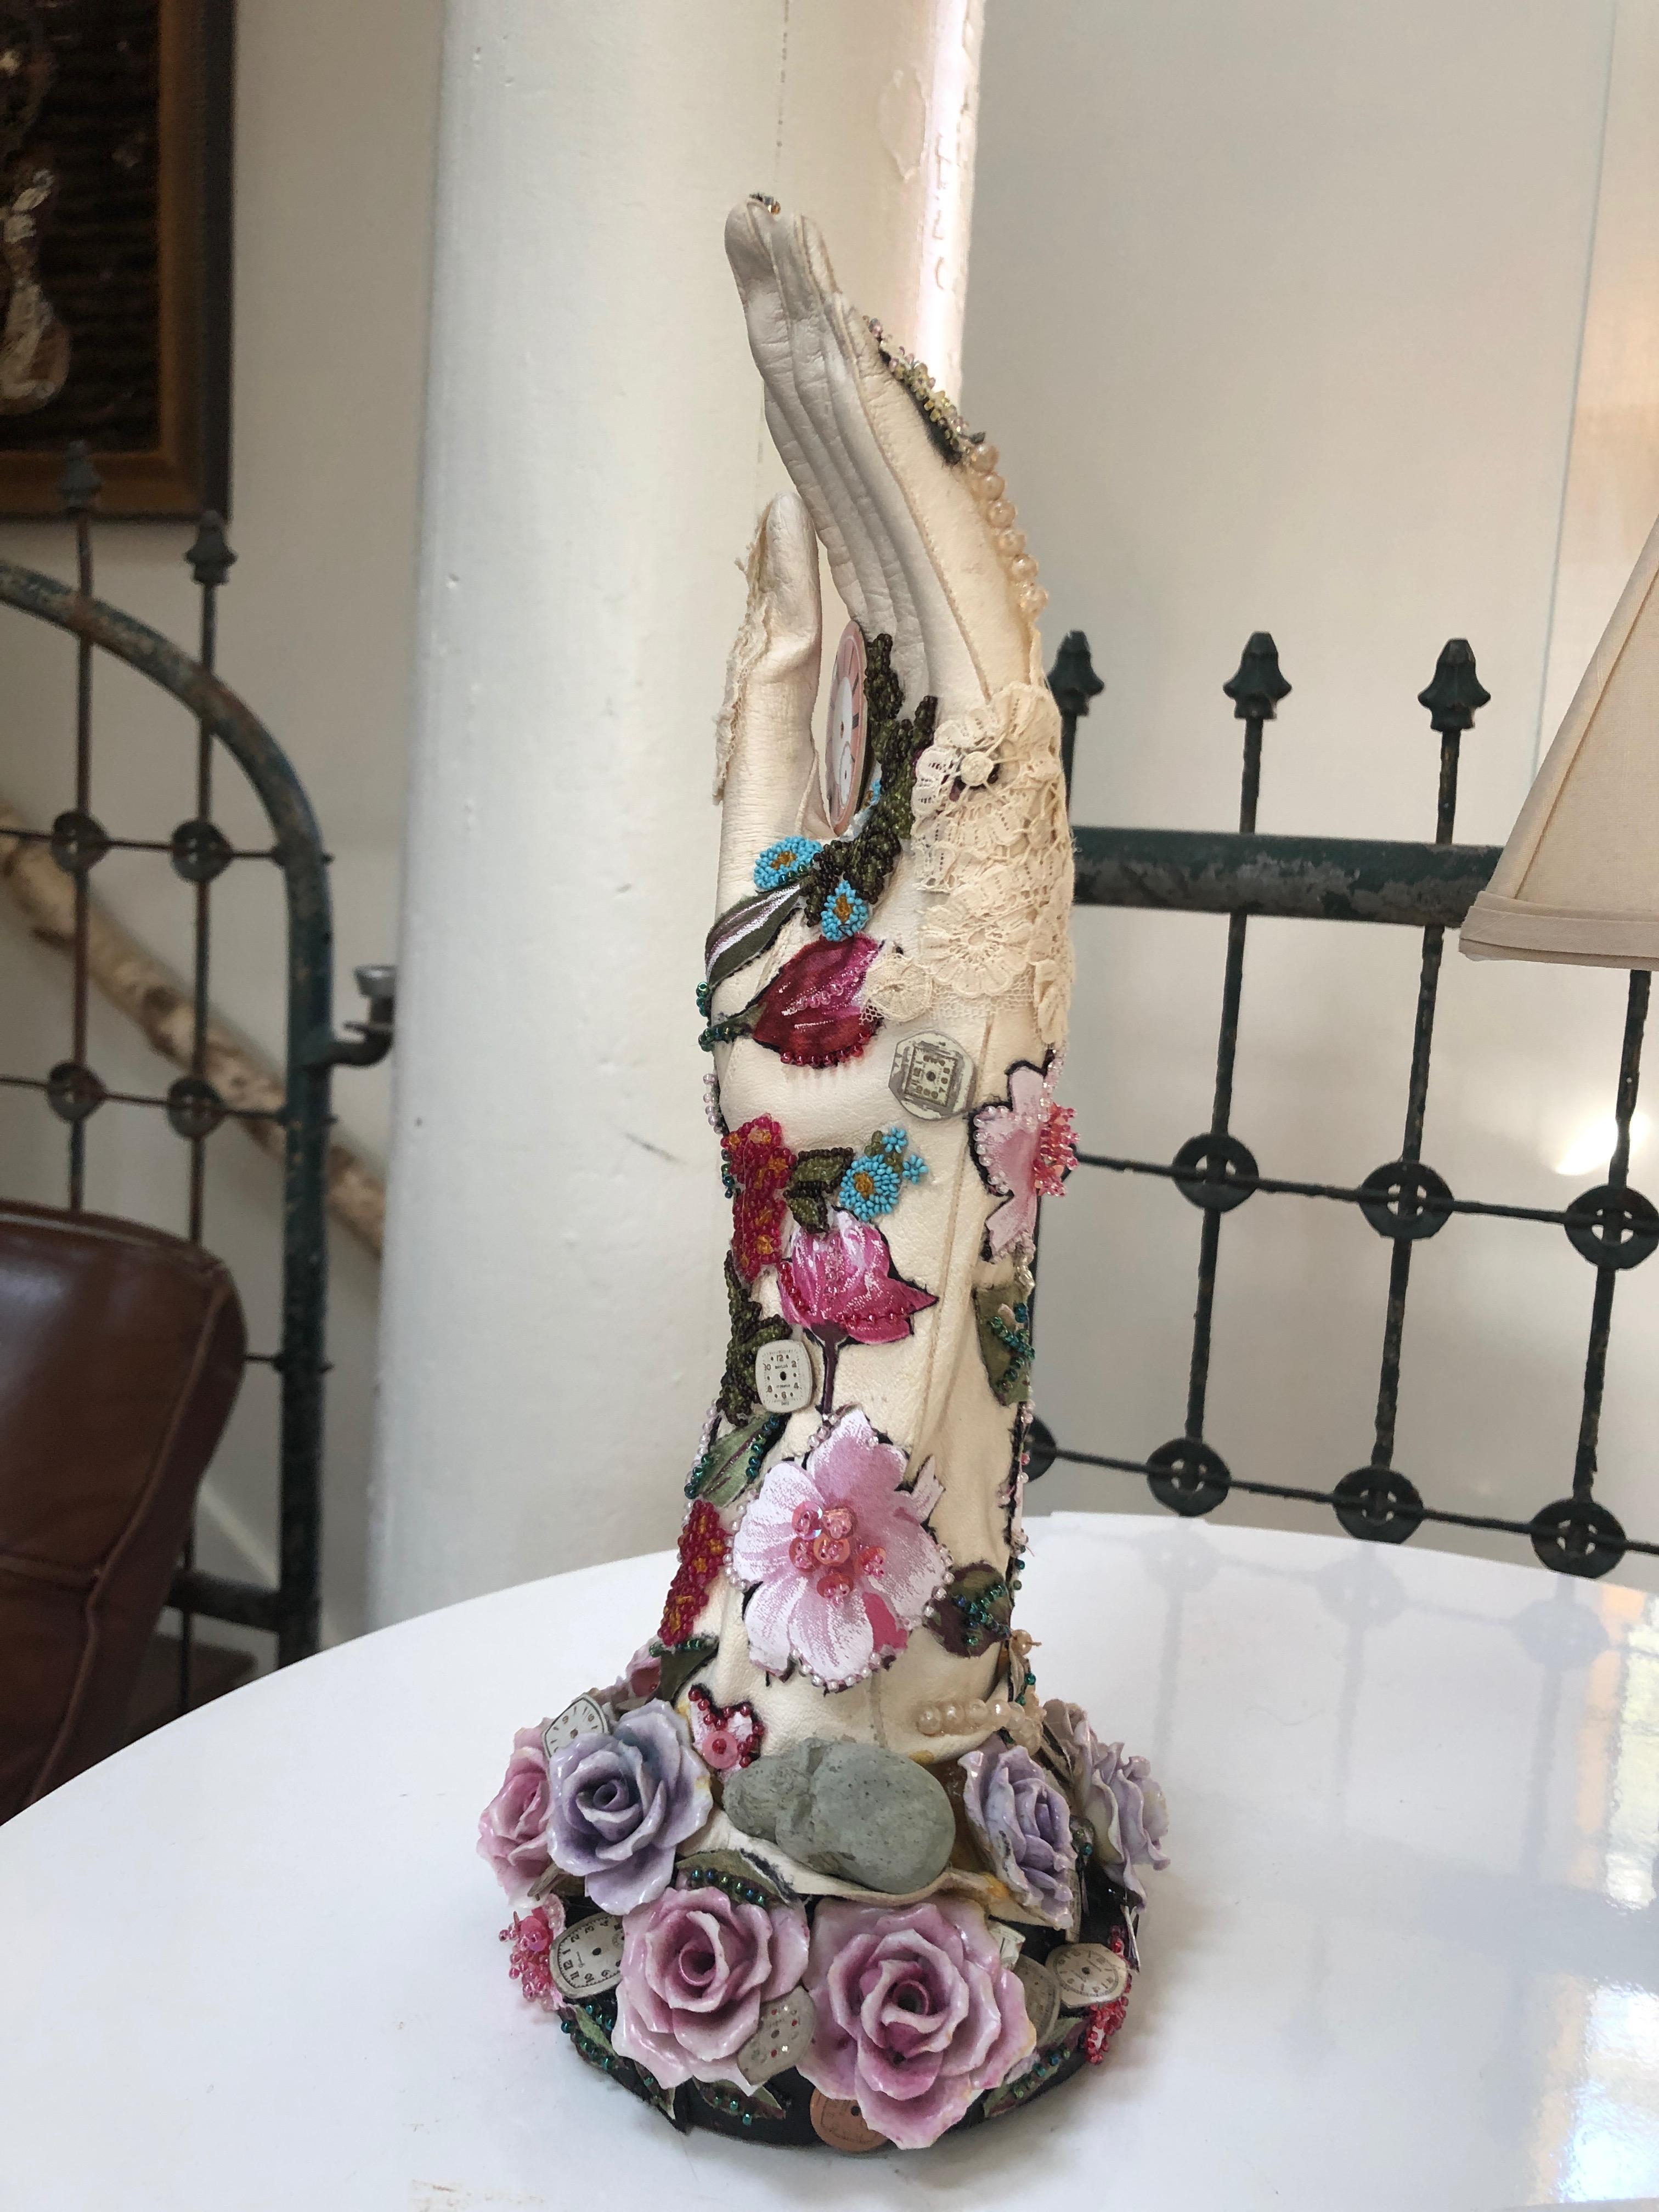 Leather Romantic Mixed-Media Sculpture Titled Hand of Time For Sale